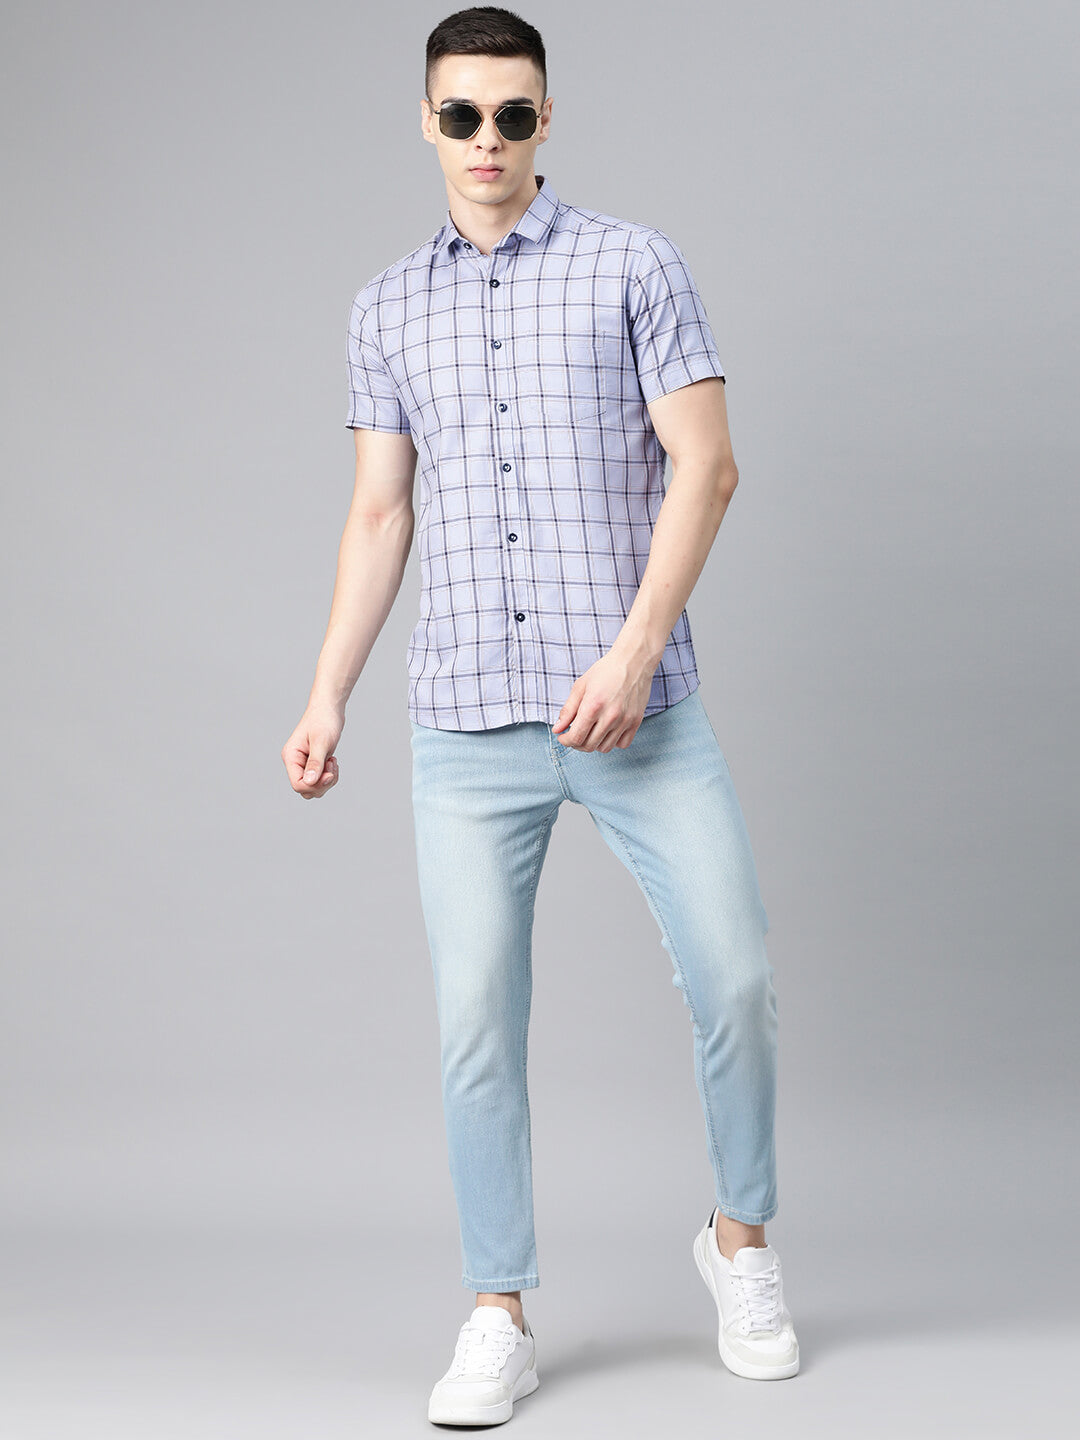 5thanfold Men's Casual Pure Cotton Half Sleeve Checkered Blue Slim Fit Shirt